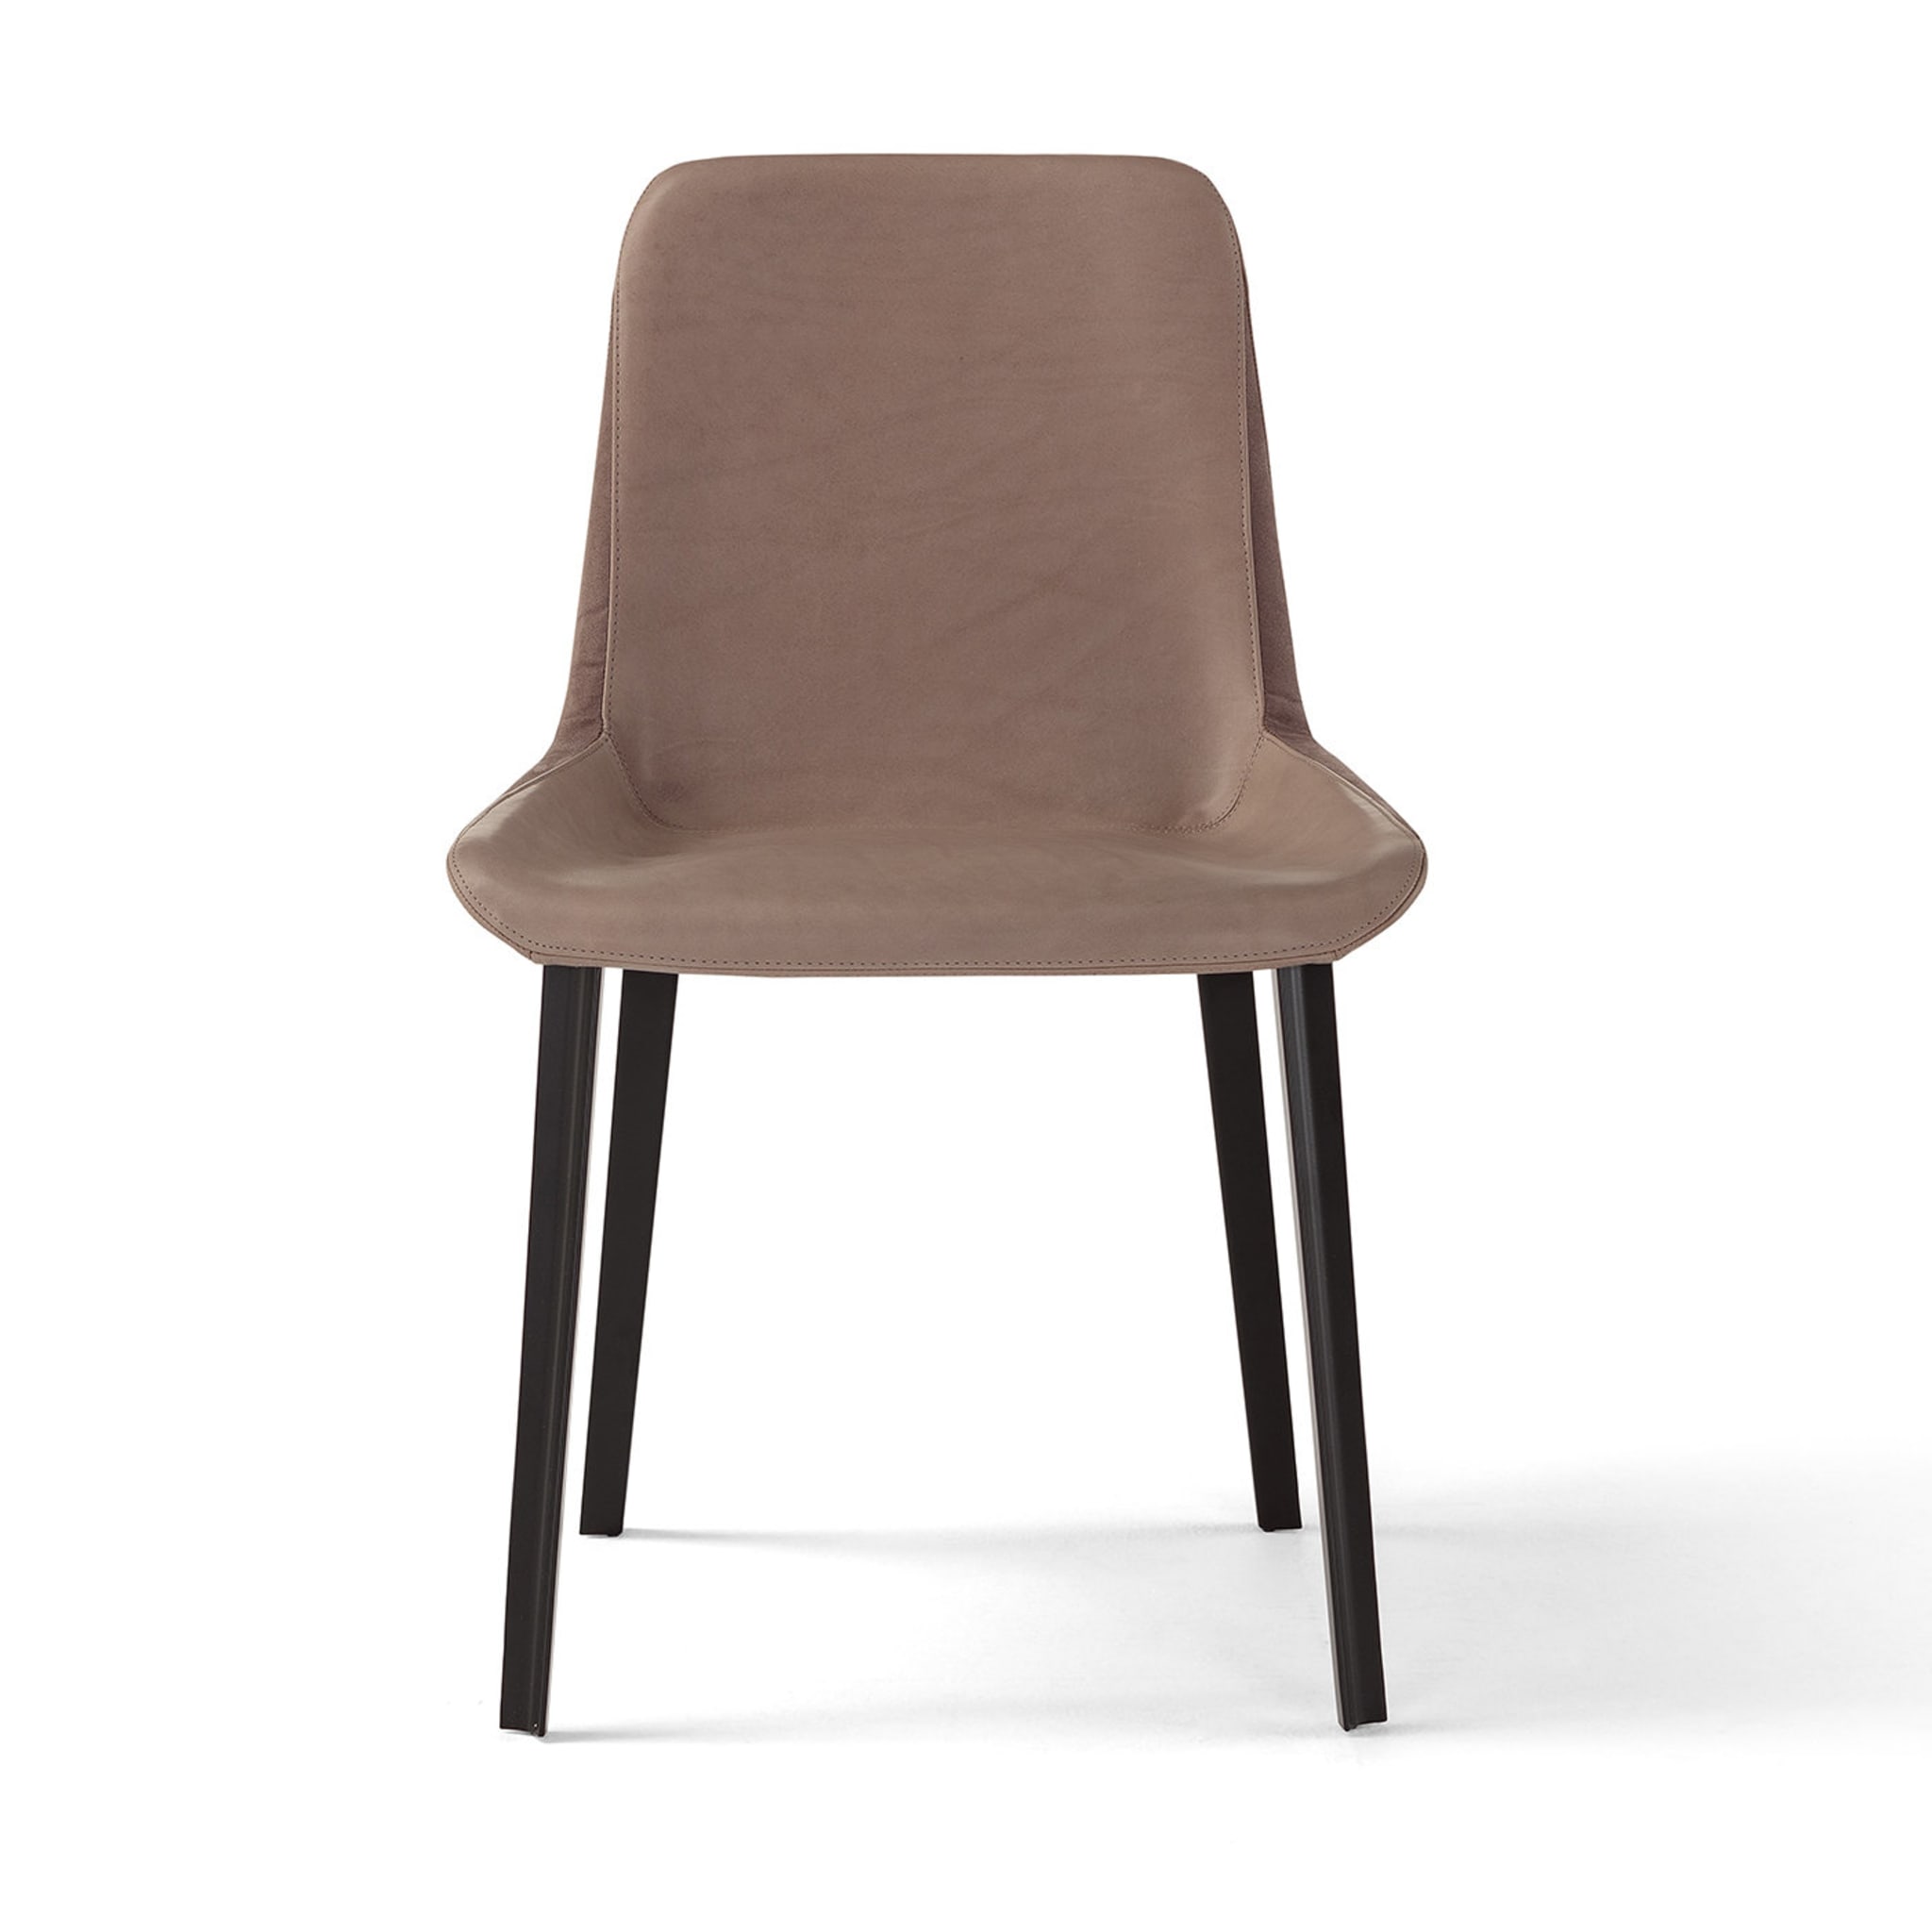 Panis Leather Chair by Anton Cristell and Emanuel Gargano - Alternative view 1